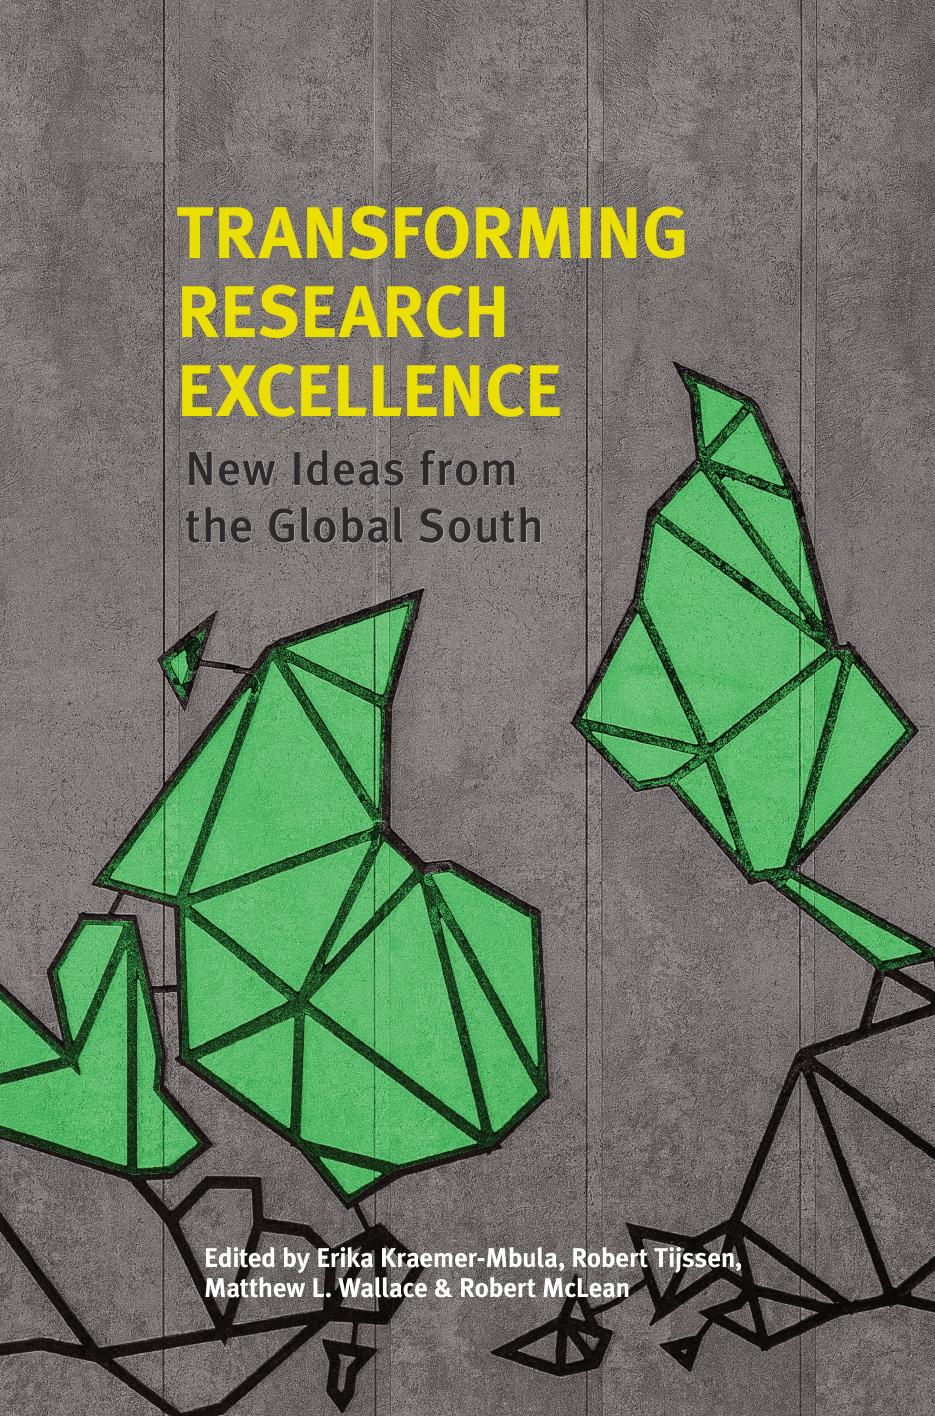 Transforming Research Excellence: New Ideas from the Global South by L. Wallace